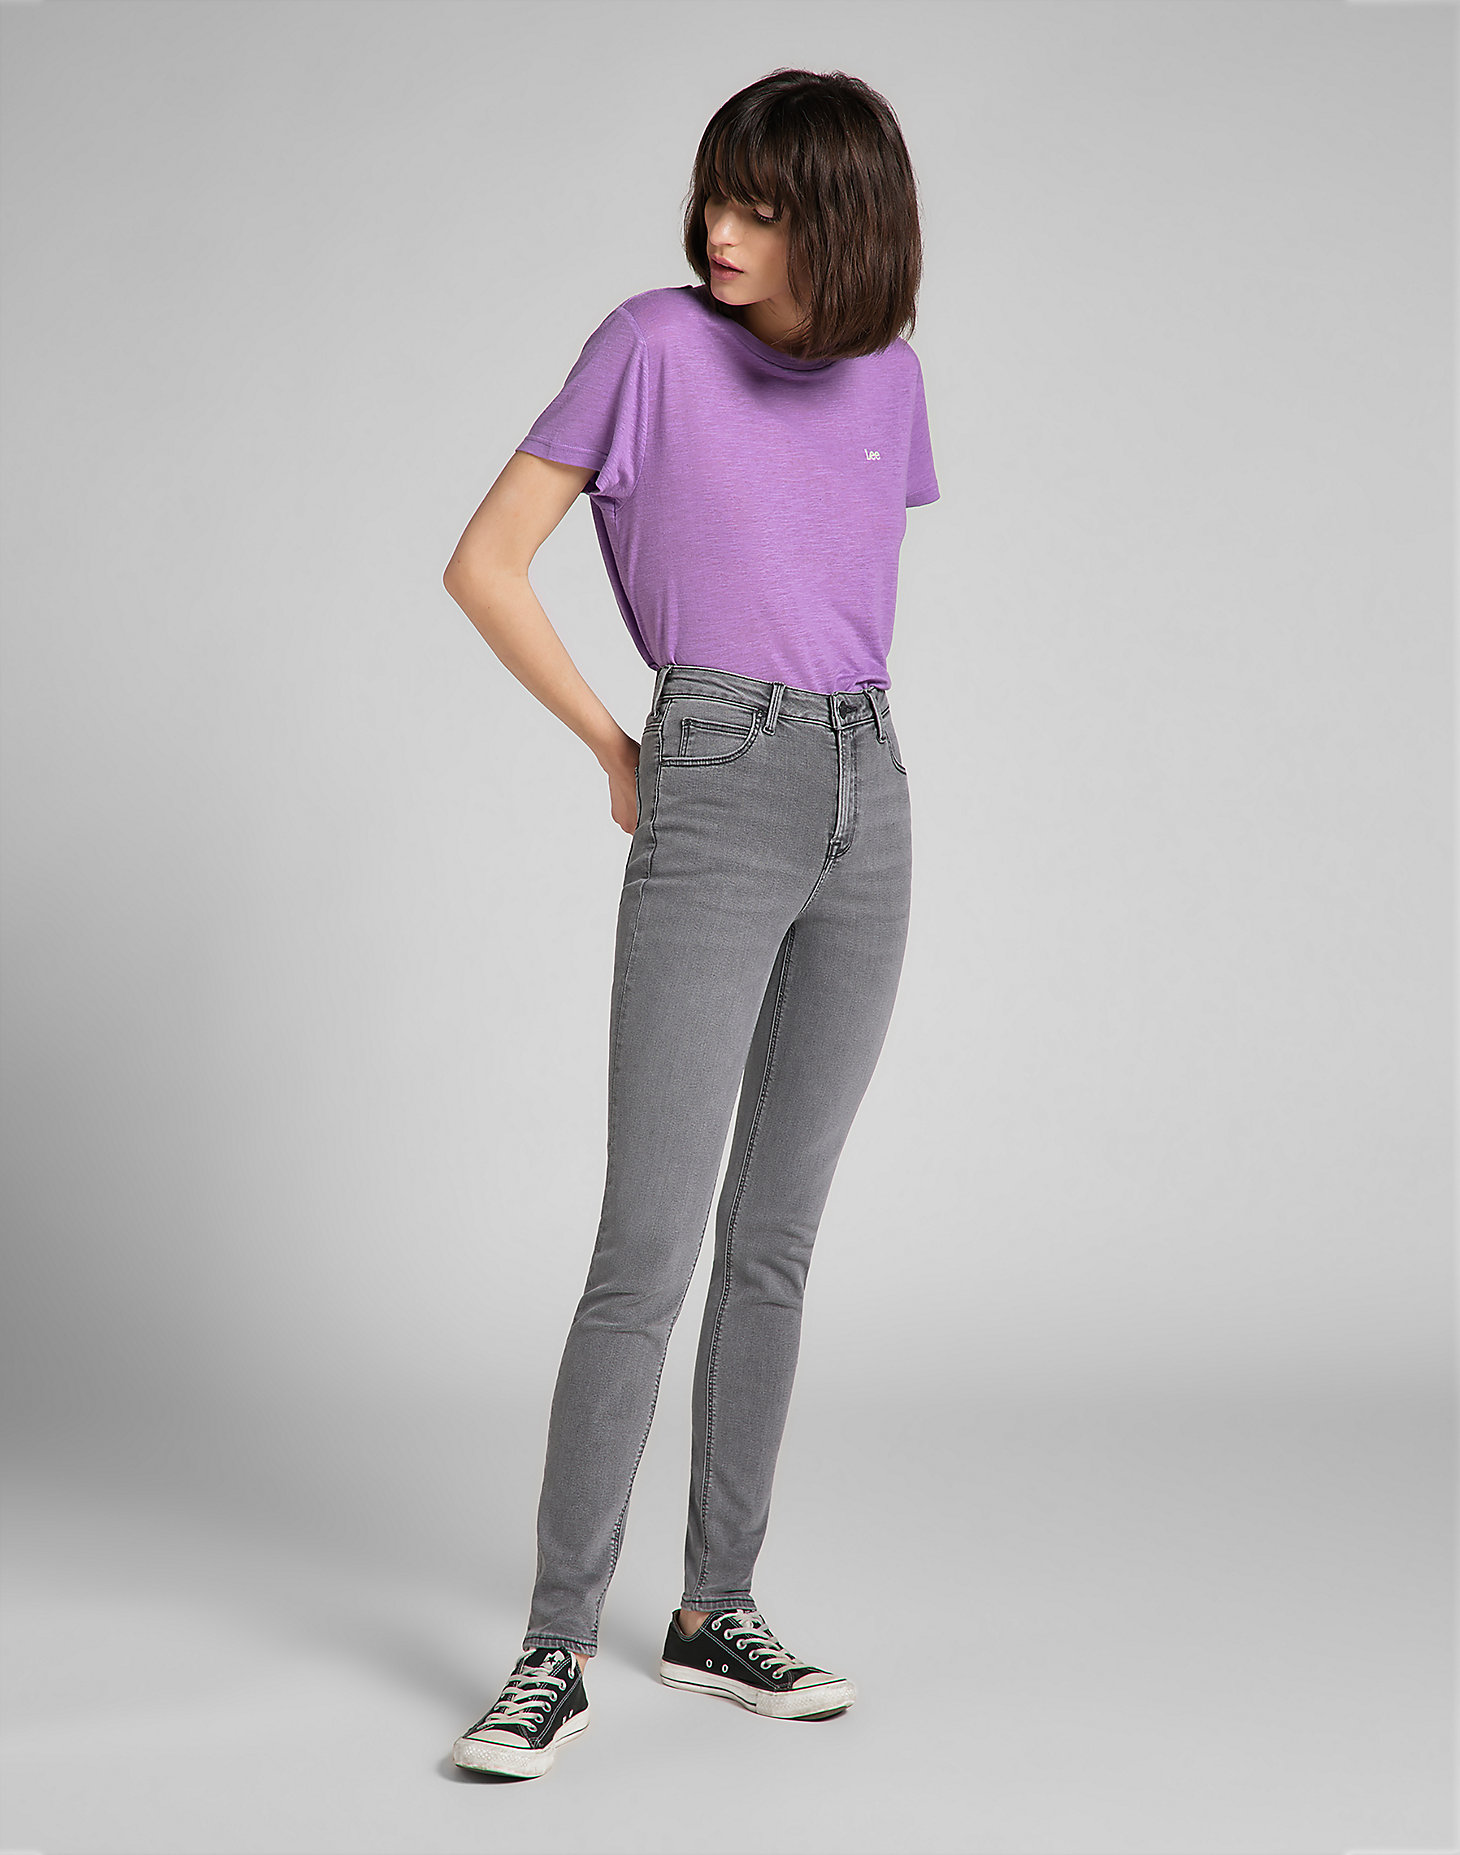 Crew Tee in Amethyst Orchid alternative view 2